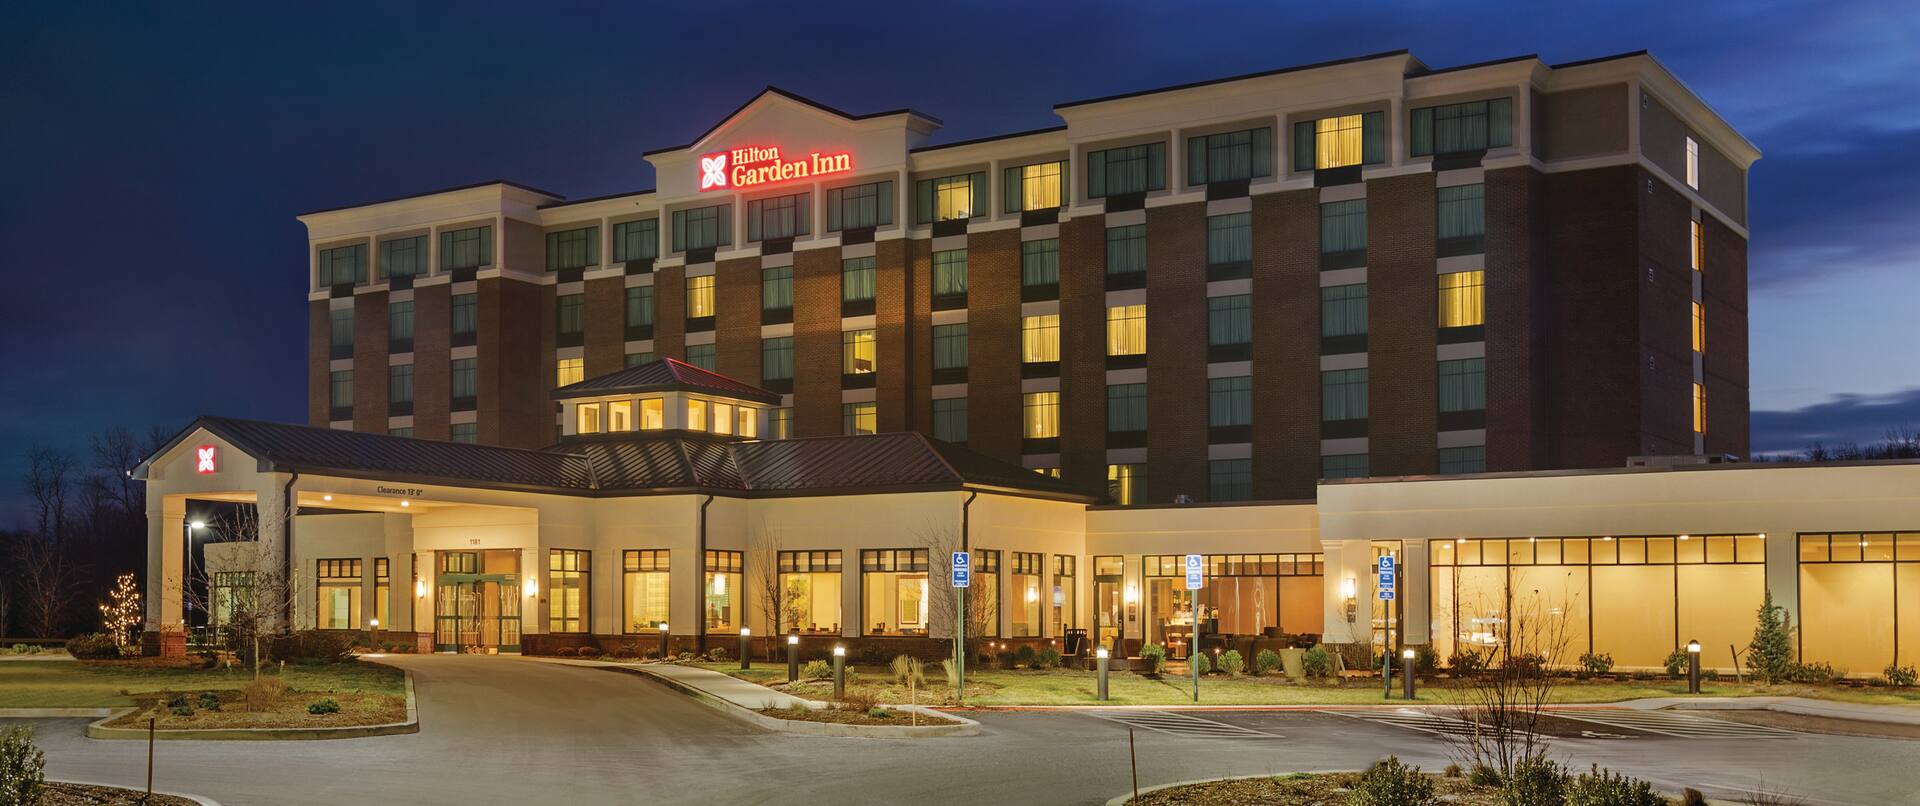 Angled View of Hotel Exterior, Signage, Circle Driveway, Landscaping, and Parking Lot Illuminated at Night